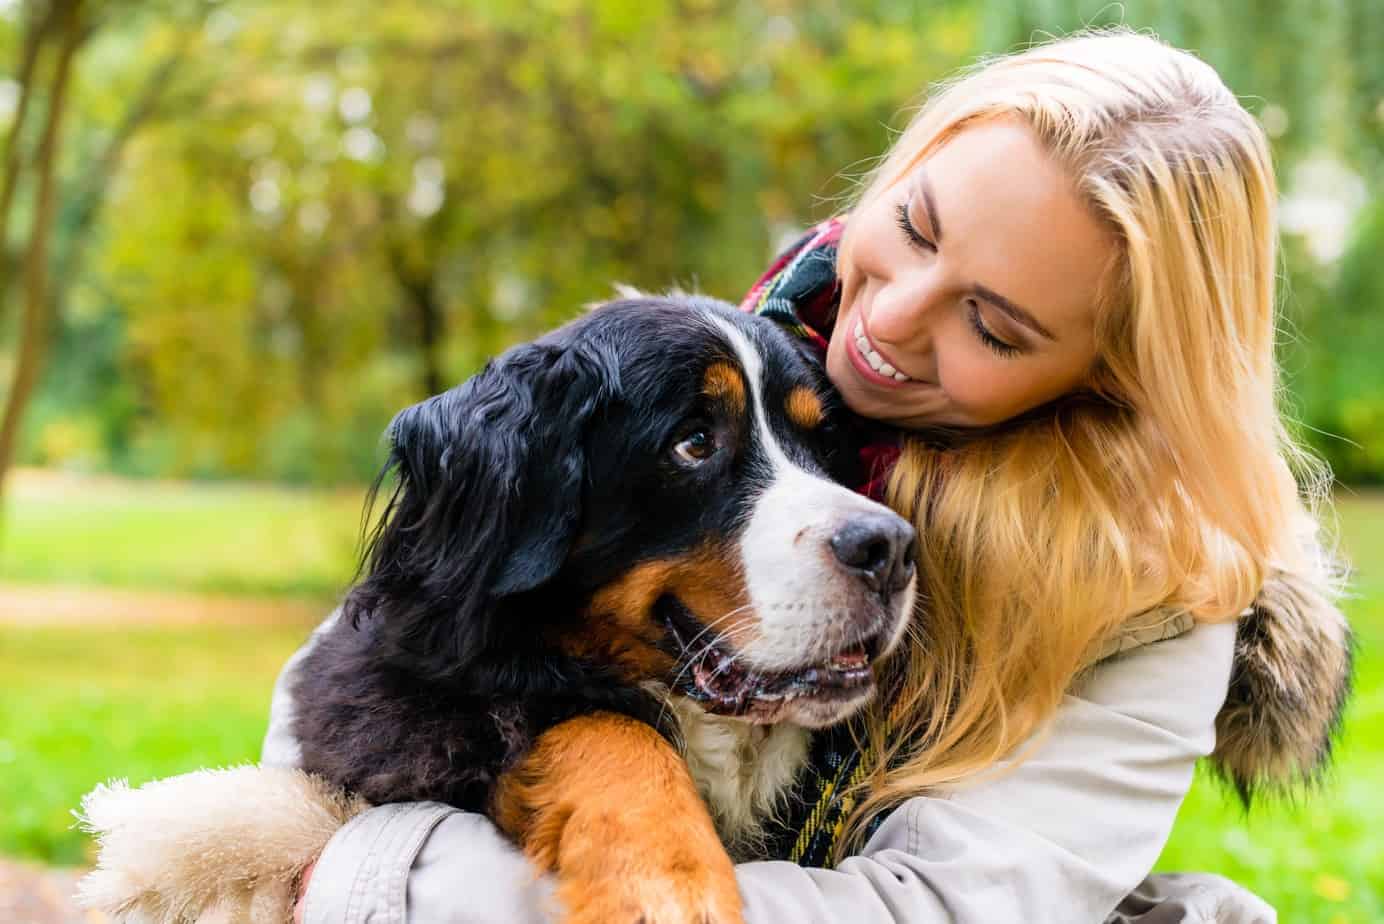 Woman hugs Bernese mountain dog. Living with dogs improves owners' health, happiness by boosting exercise, lowering cholesterol and blood pressure and reducing loneliness.